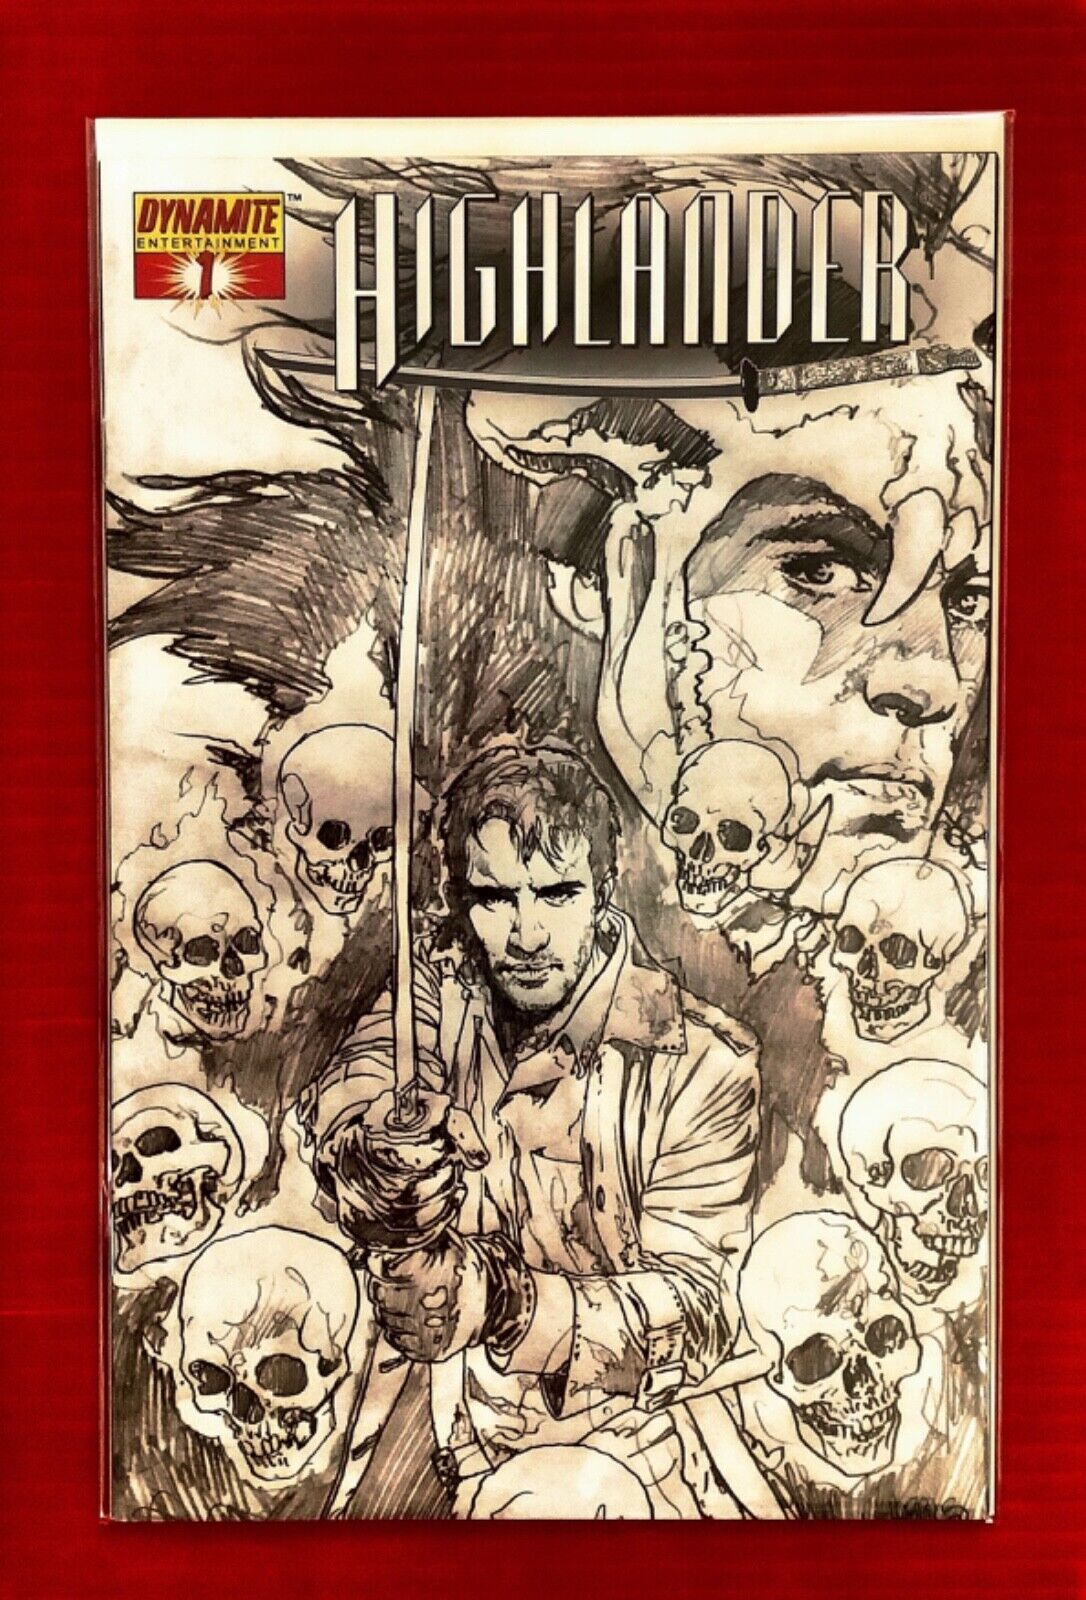 HIGHLANDER #1 SKETCH VARIANT COVER NEAR MINT BUY THIS SCOTTISH FELLOW TODAY